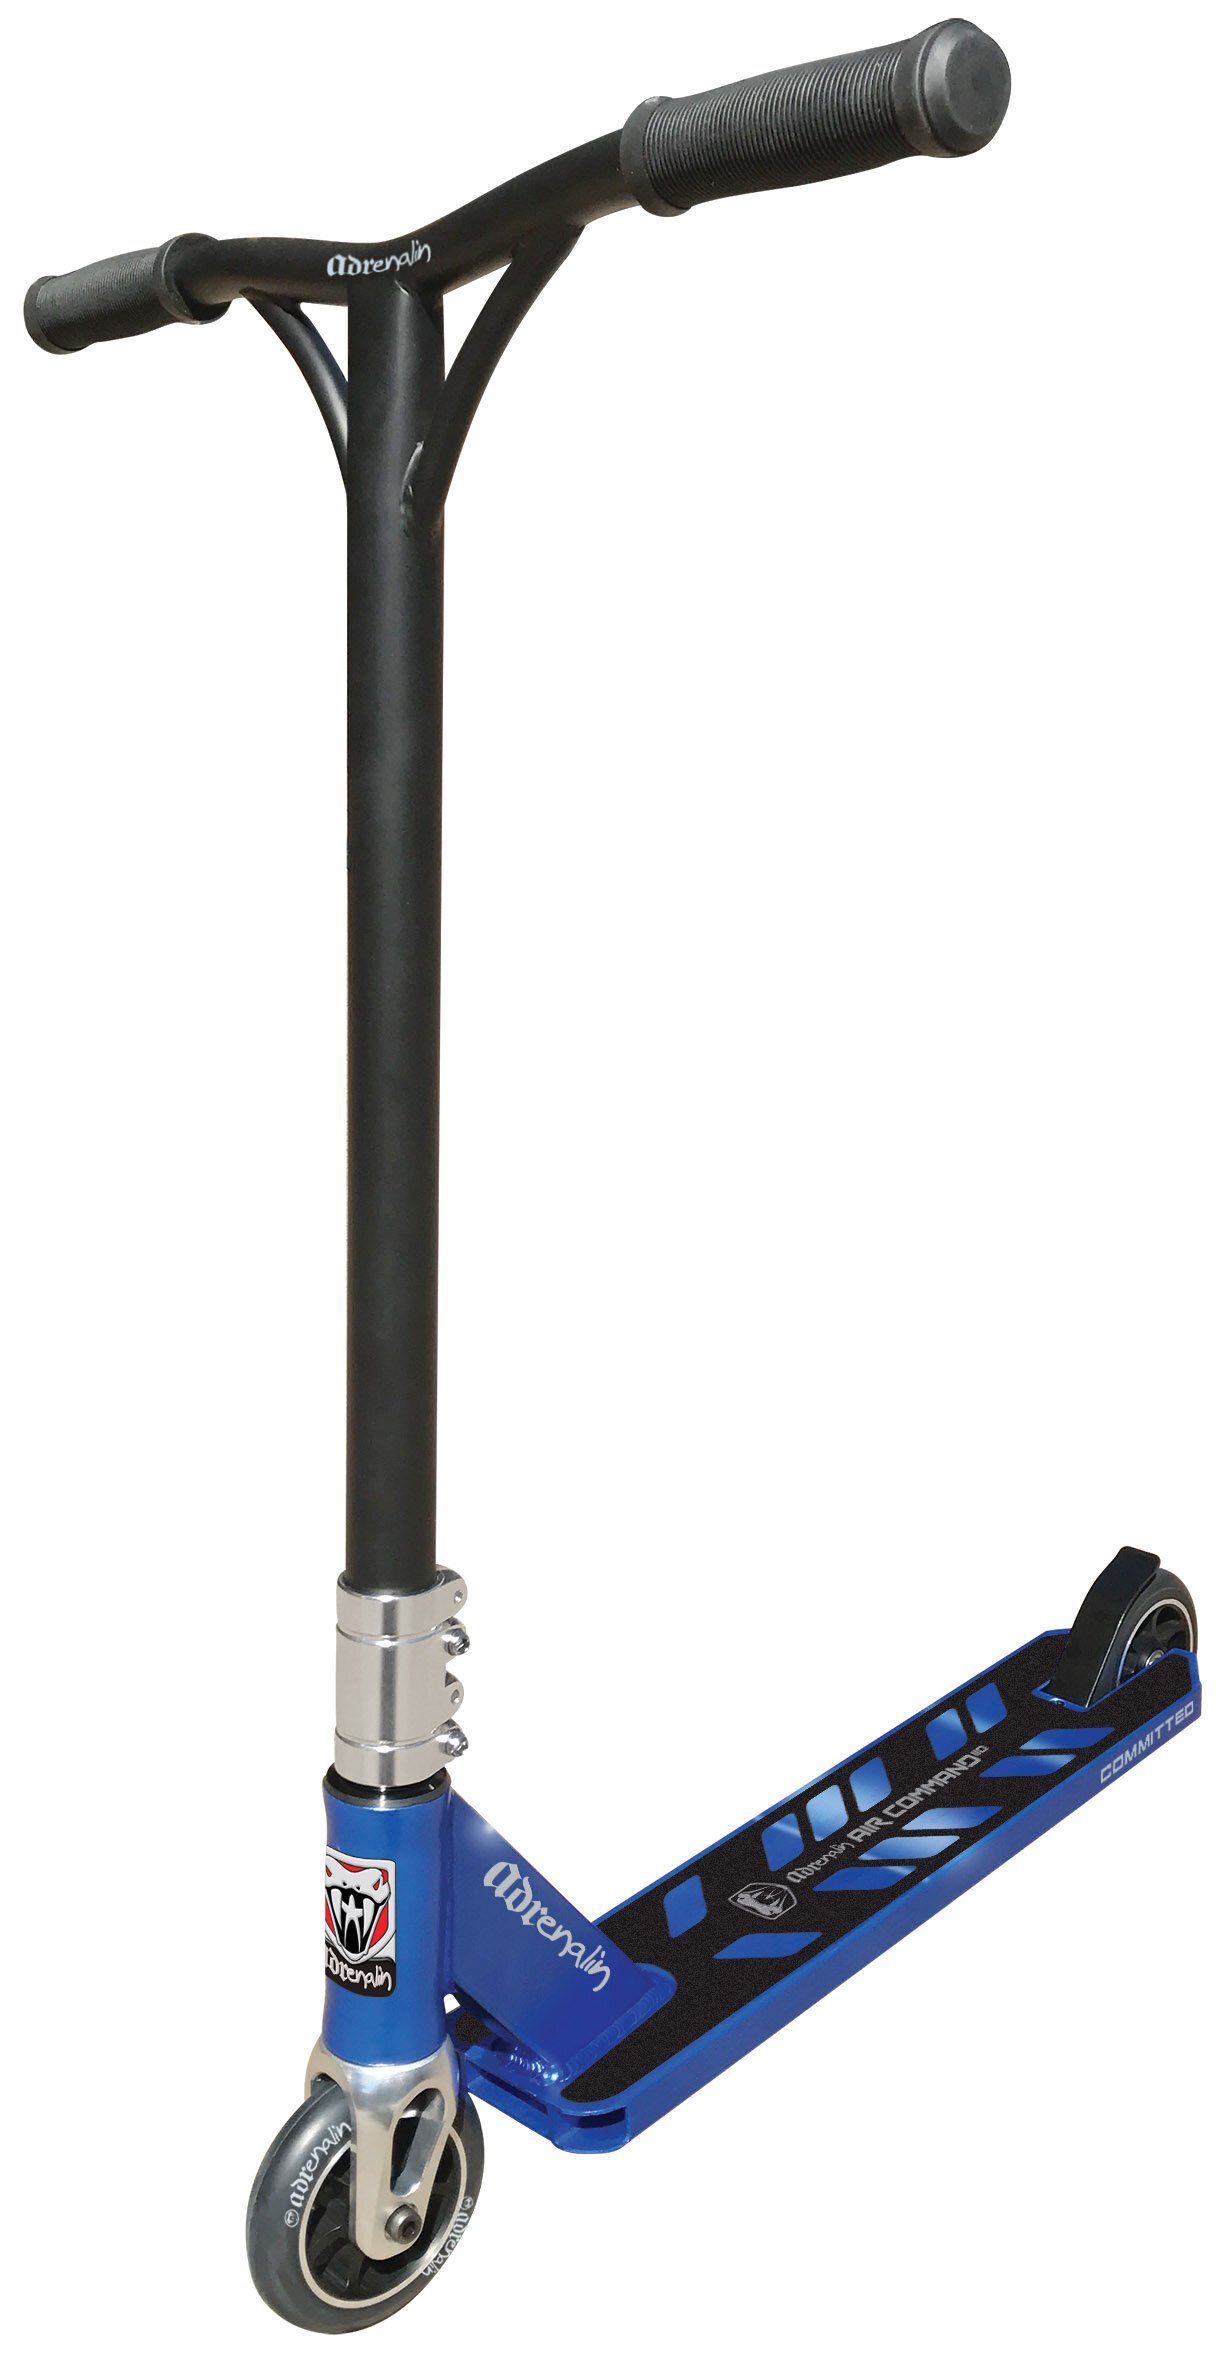 Adrenalin Air Command 110mm Stunt Scooter - Buy Online - Ph: 1800-370-766 -  AfterPay & ZipPay Available!